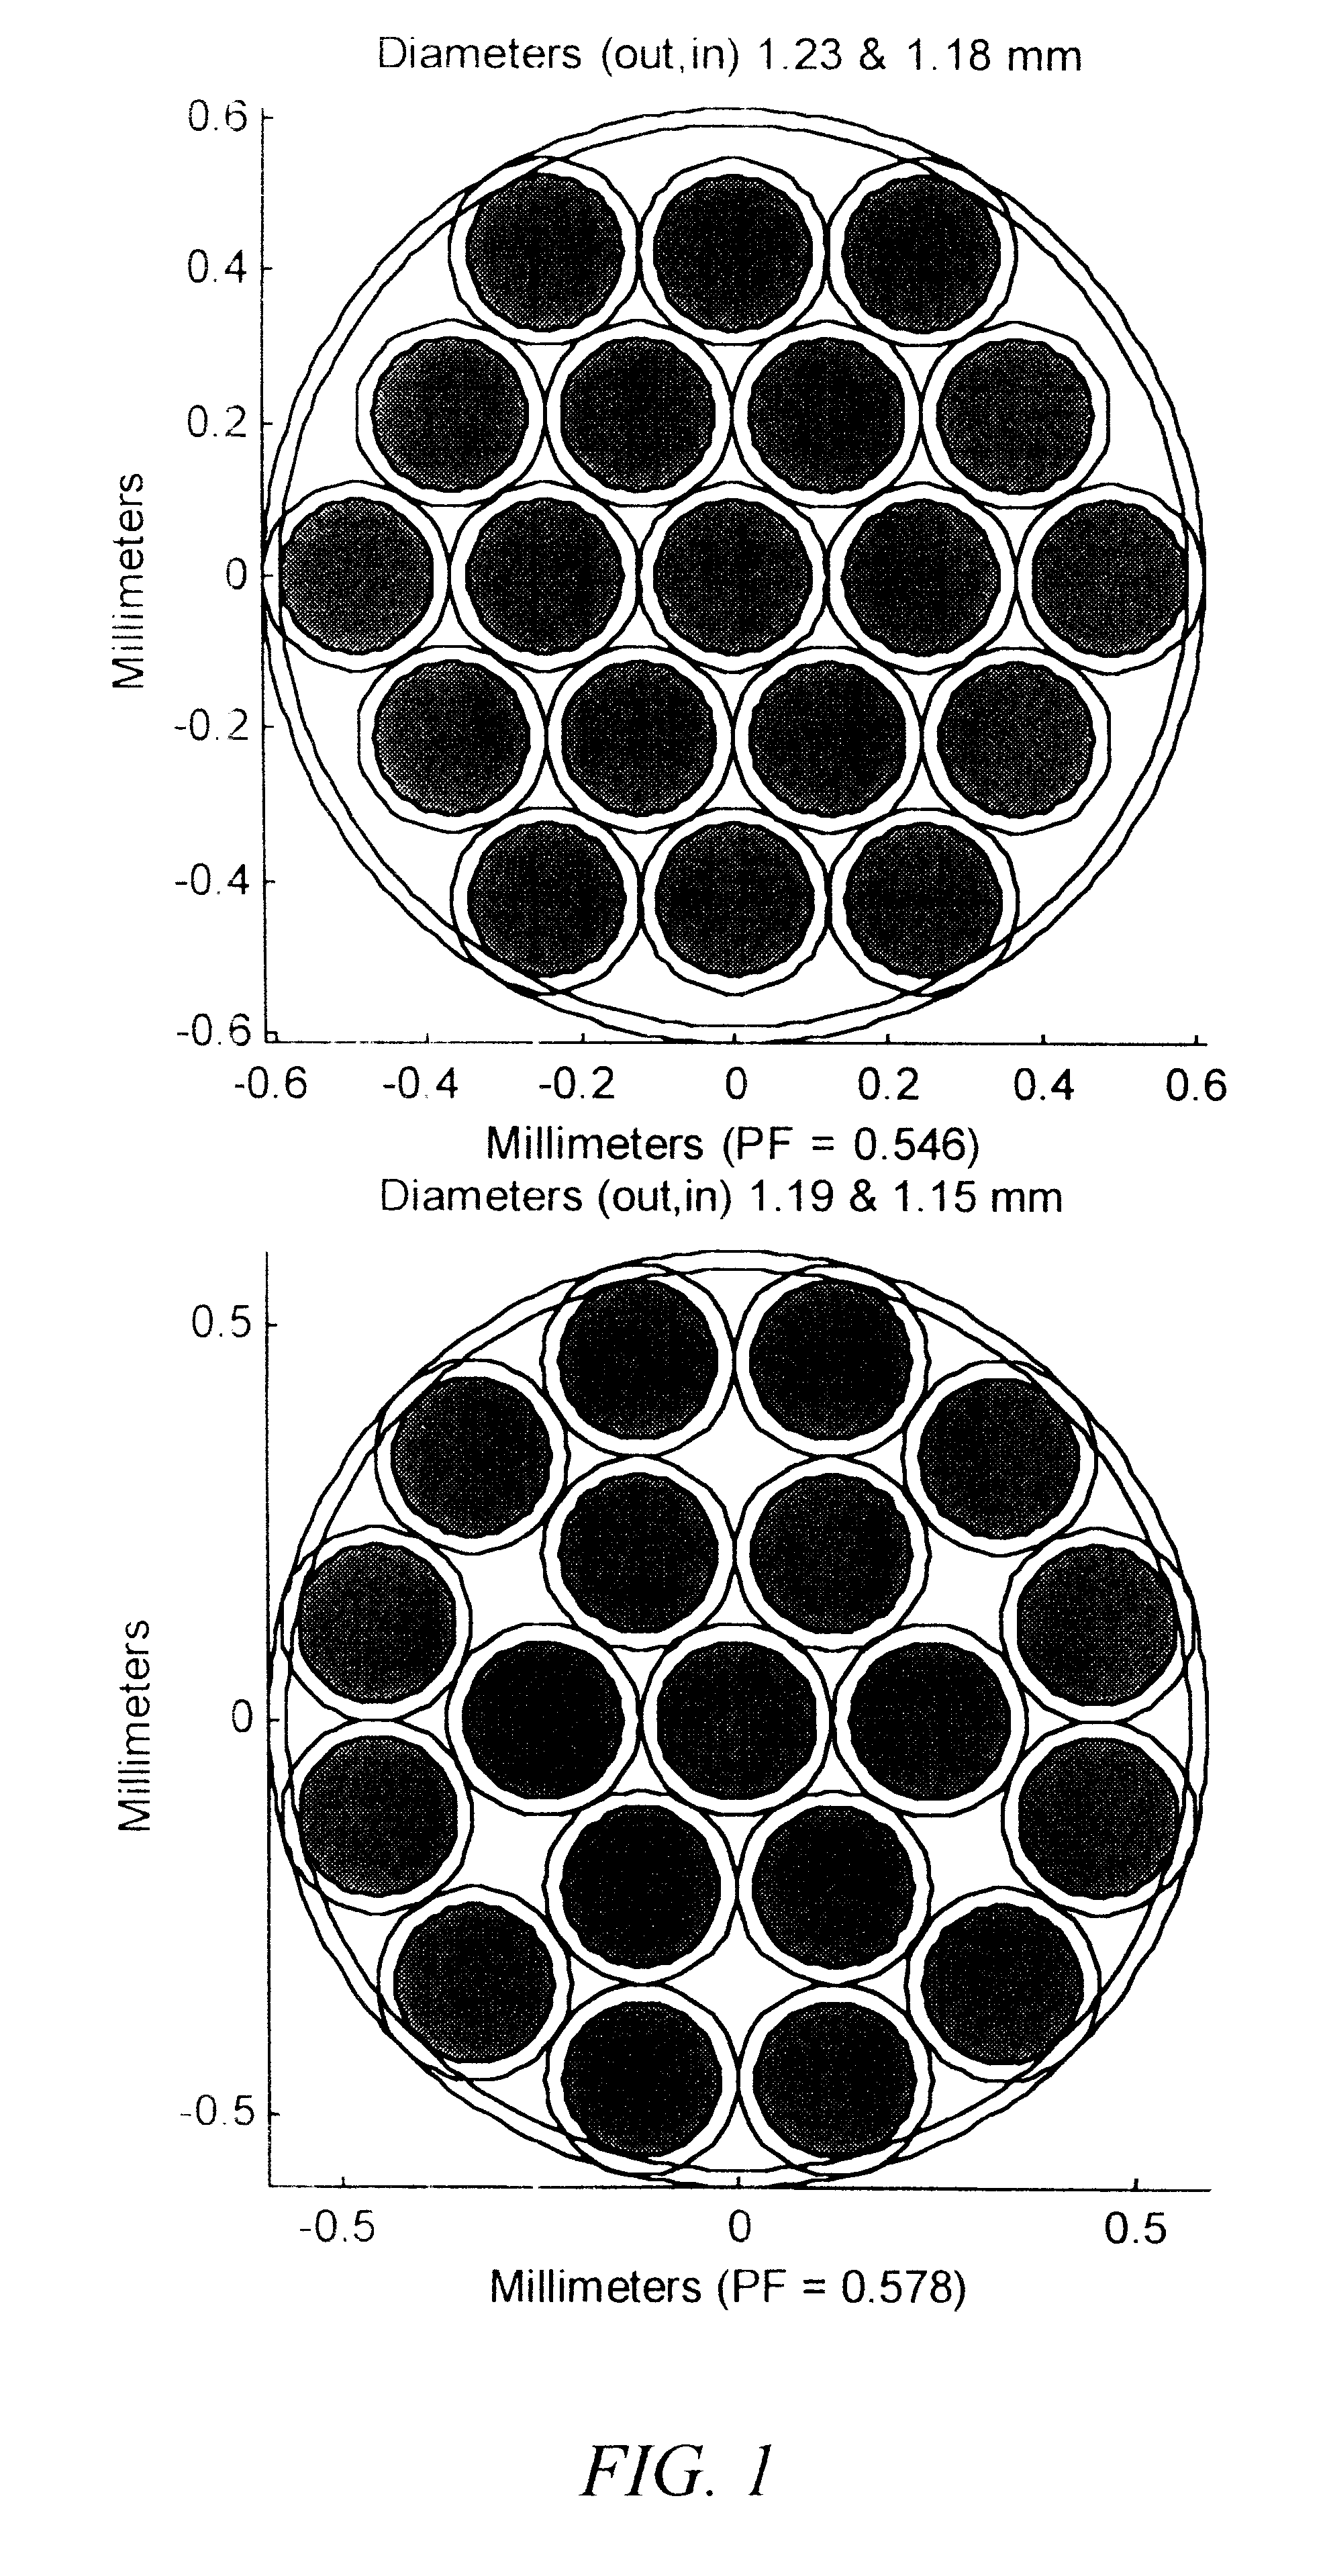 Fiber optic illumination and detection patterns, shapes, and locations for use in spectroscopic analysis